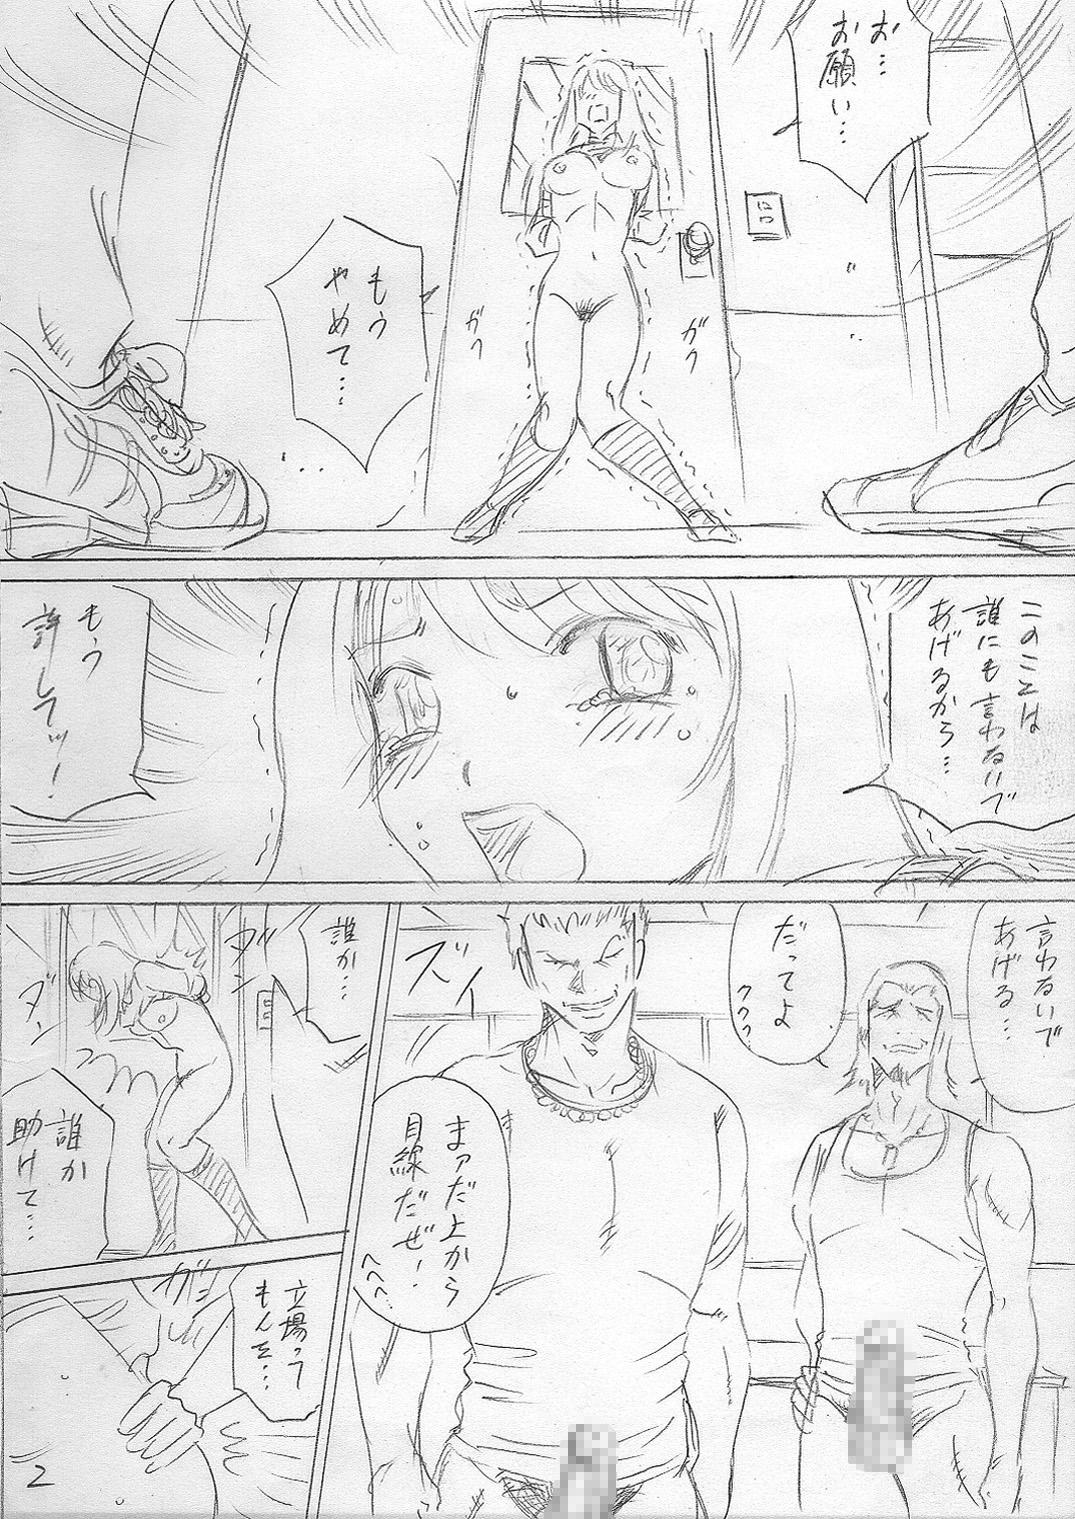 Old 落ちていく日（後編） Gay Kissing - Page 2